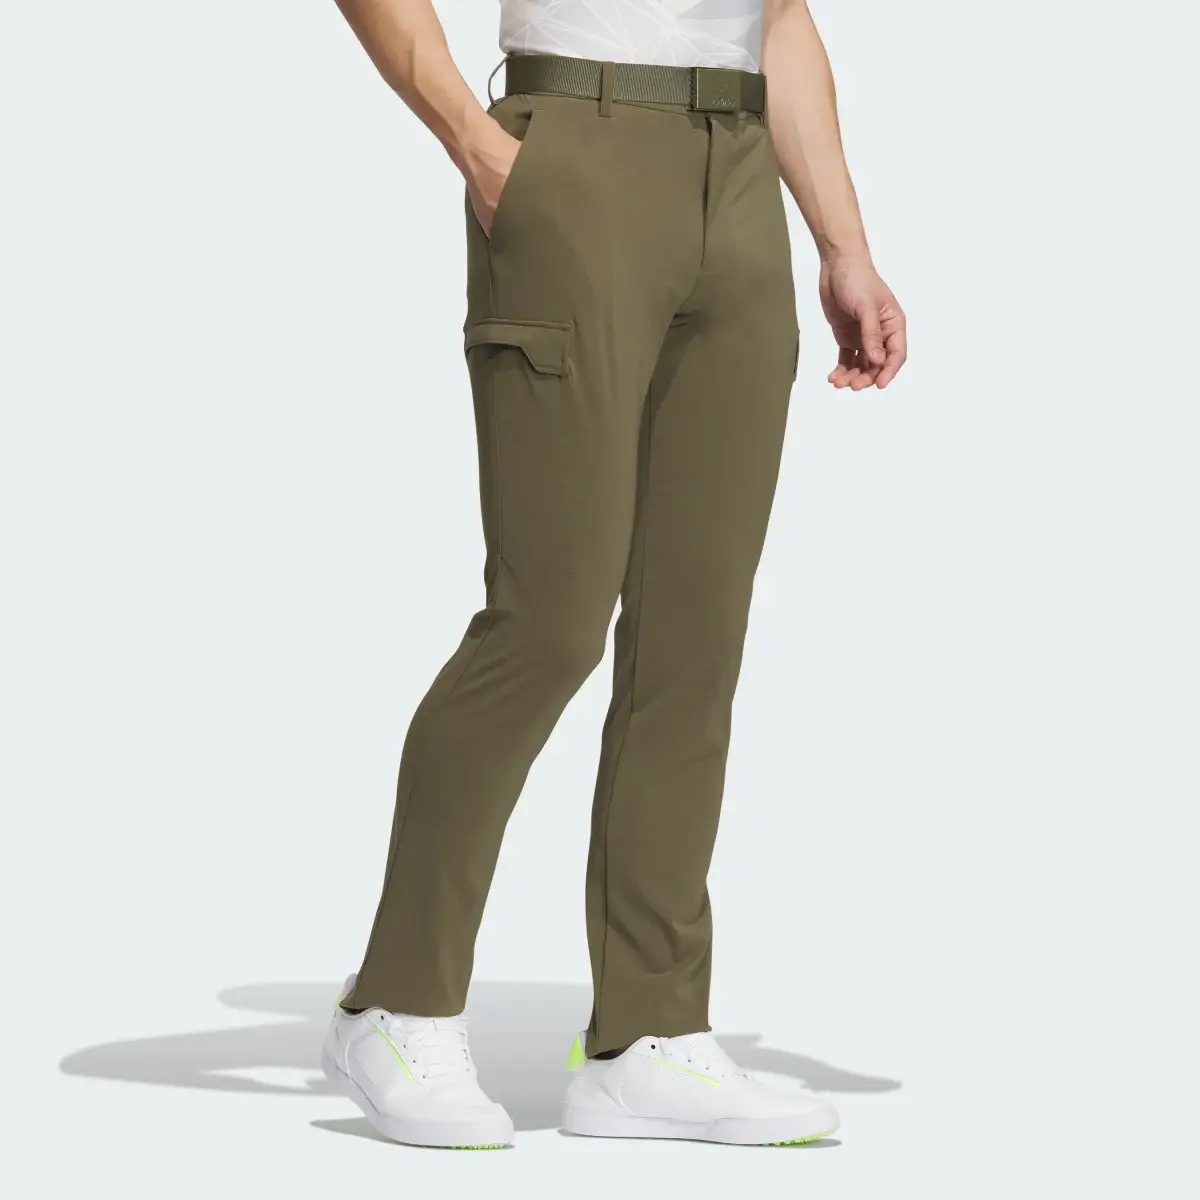 Adidas Go-To Cargo Pocket Long Trousers. 3